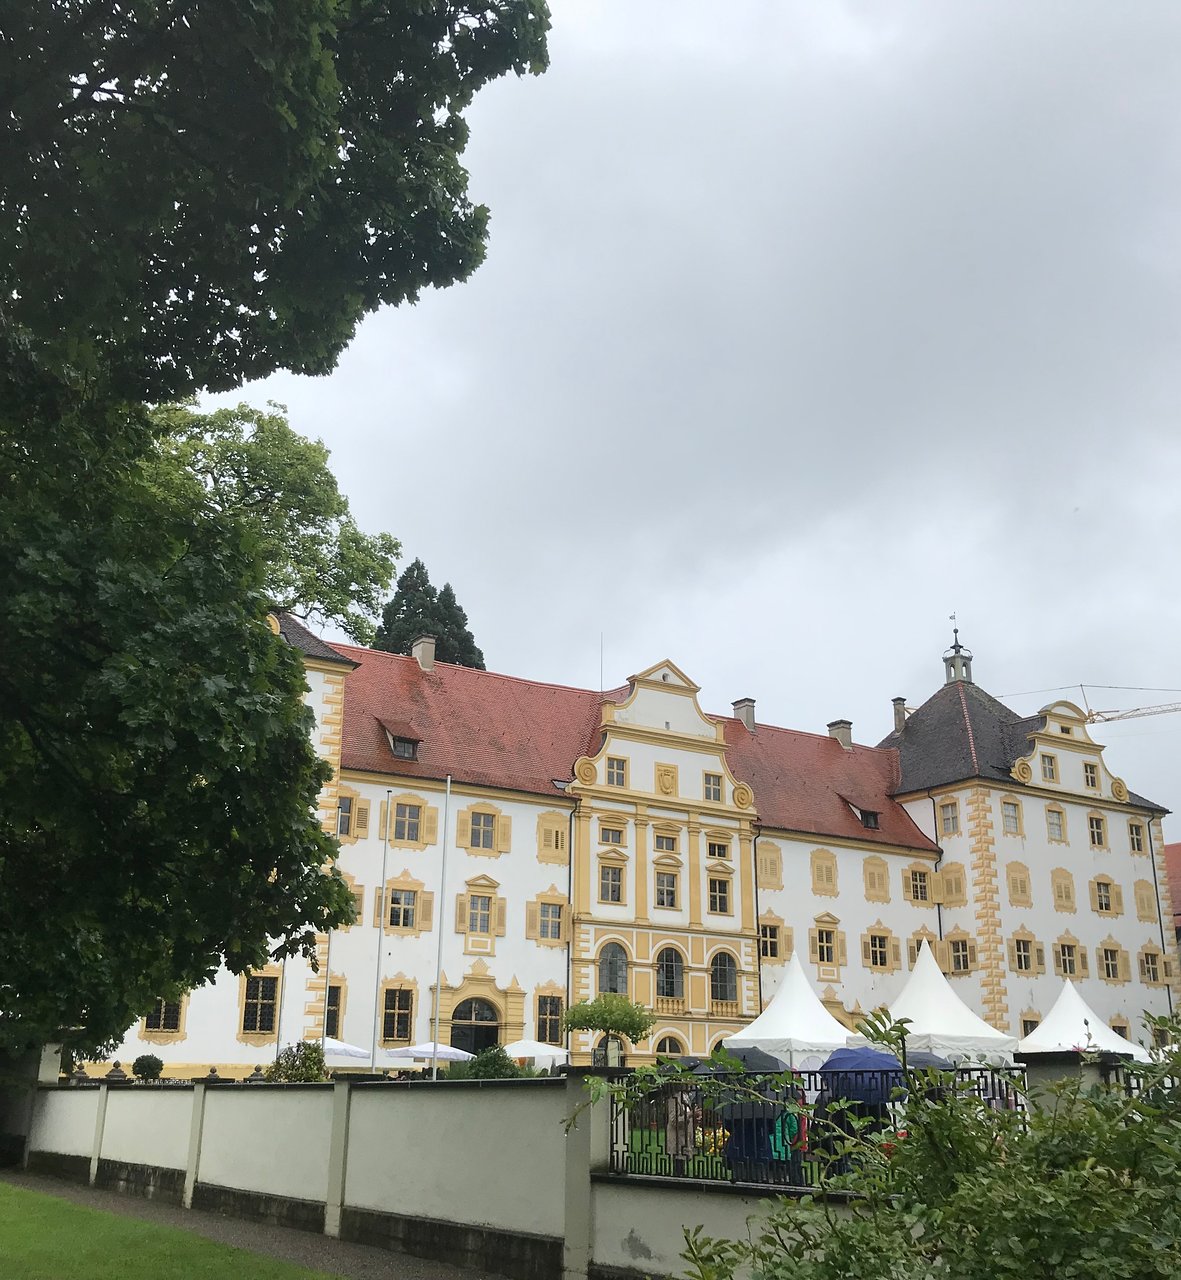 Schloss Garten Best Of Salem Monastery & Palace 2020 All You Need to Know before